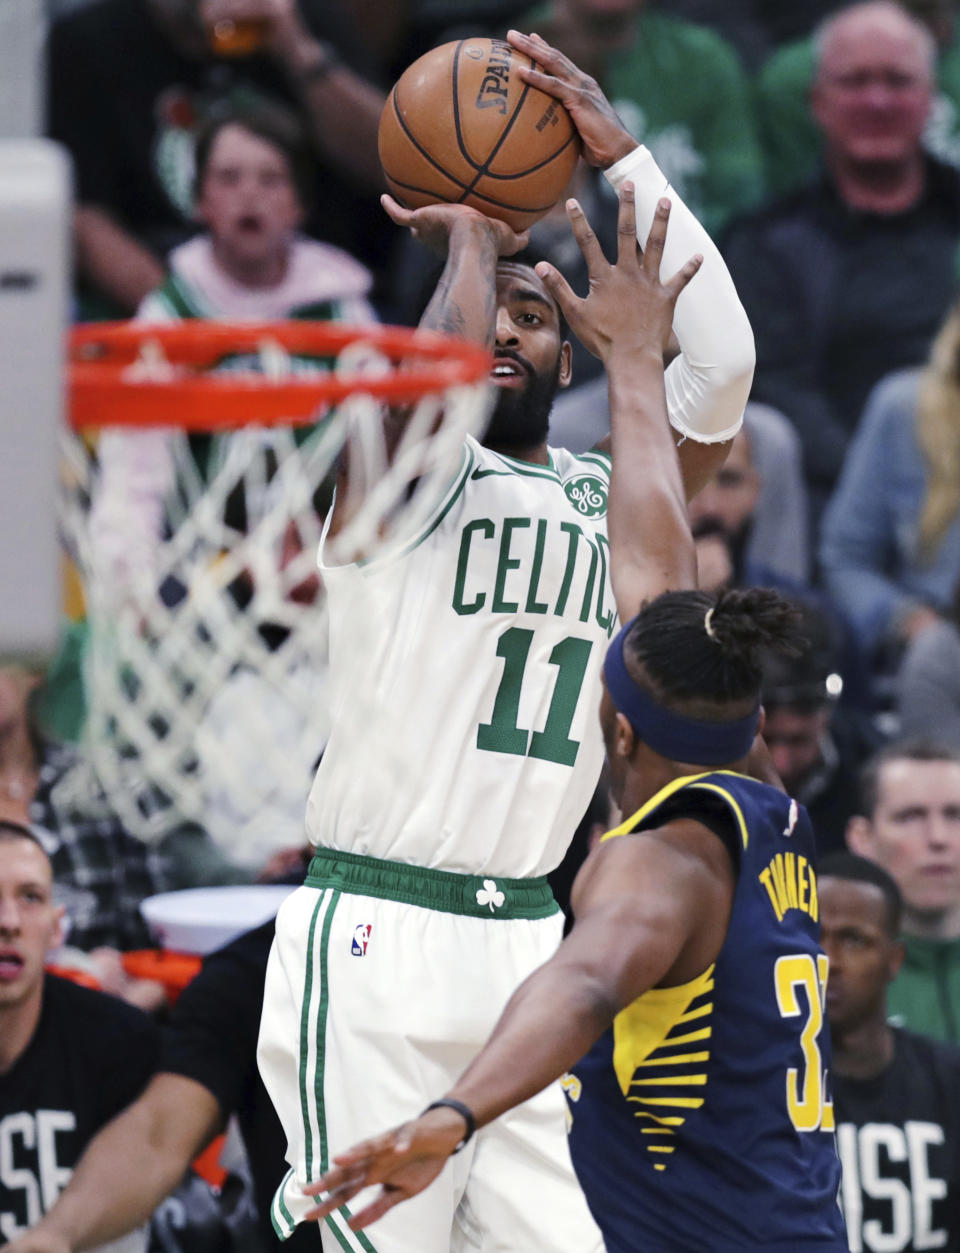 Boston Celtics guard Kyrie Irving (11) shoots over Indiana Pacers center Myles Turner (33) during the first quarter of Game 2 of an NBA basketball first-round playoff series, Wednesday, April 17, 2019, in Boston. (AP Photo/Charles Krupa)